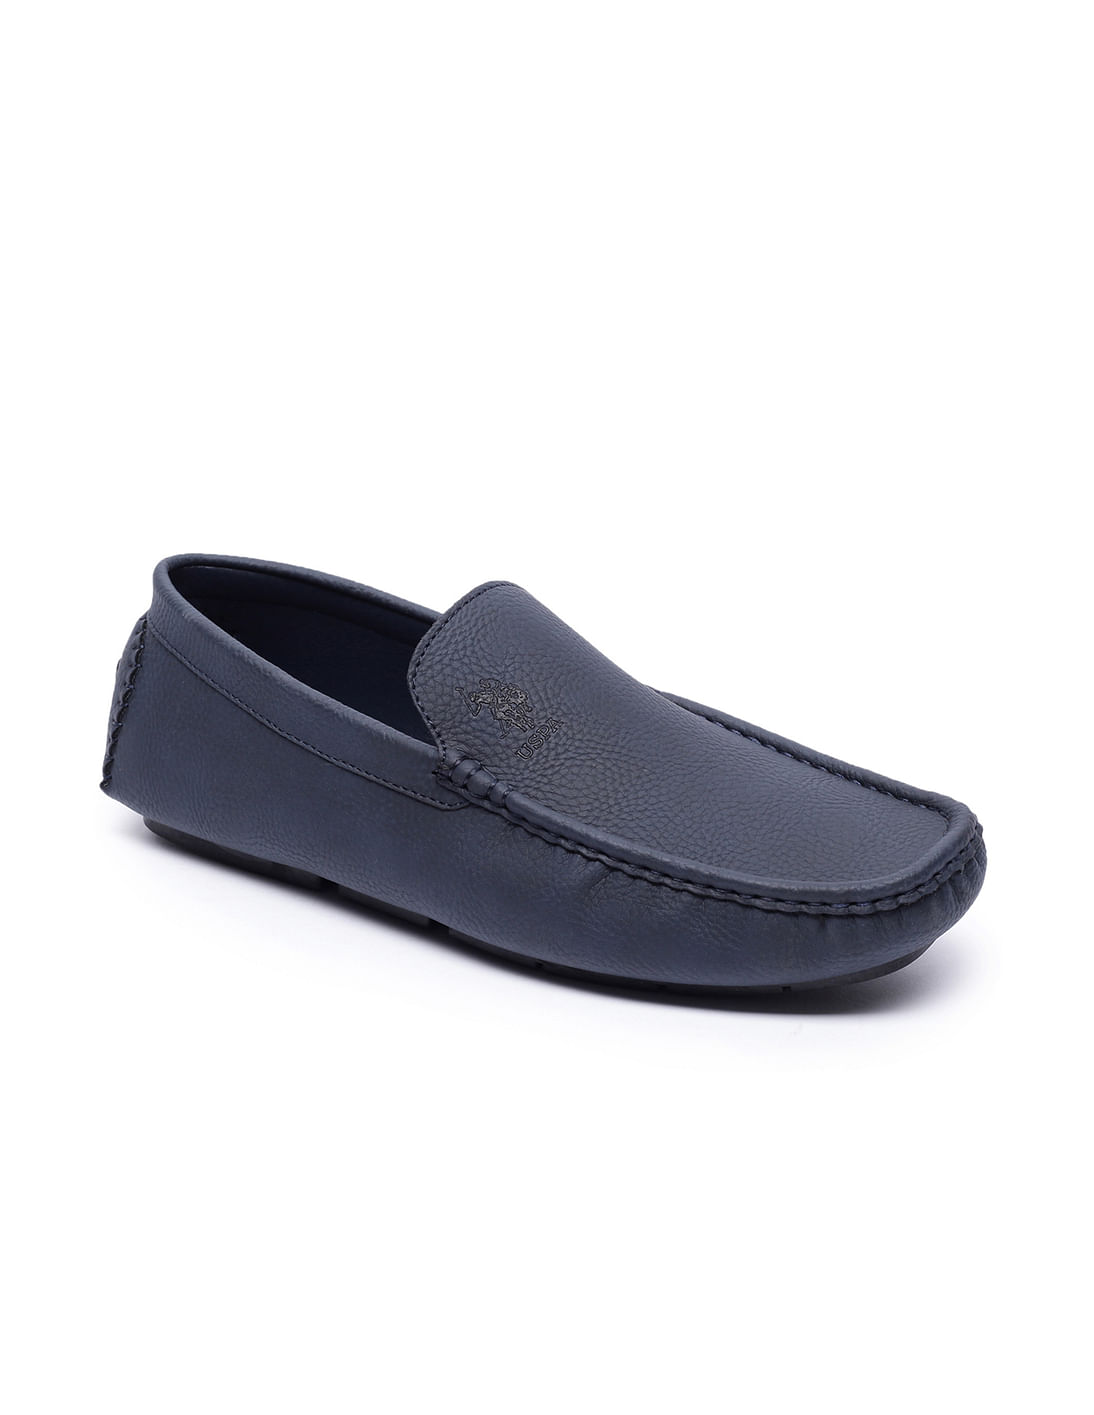 Buy U.S. Polo Assn. Men Round Toe Solid Glens Loafers - NNNOW.com